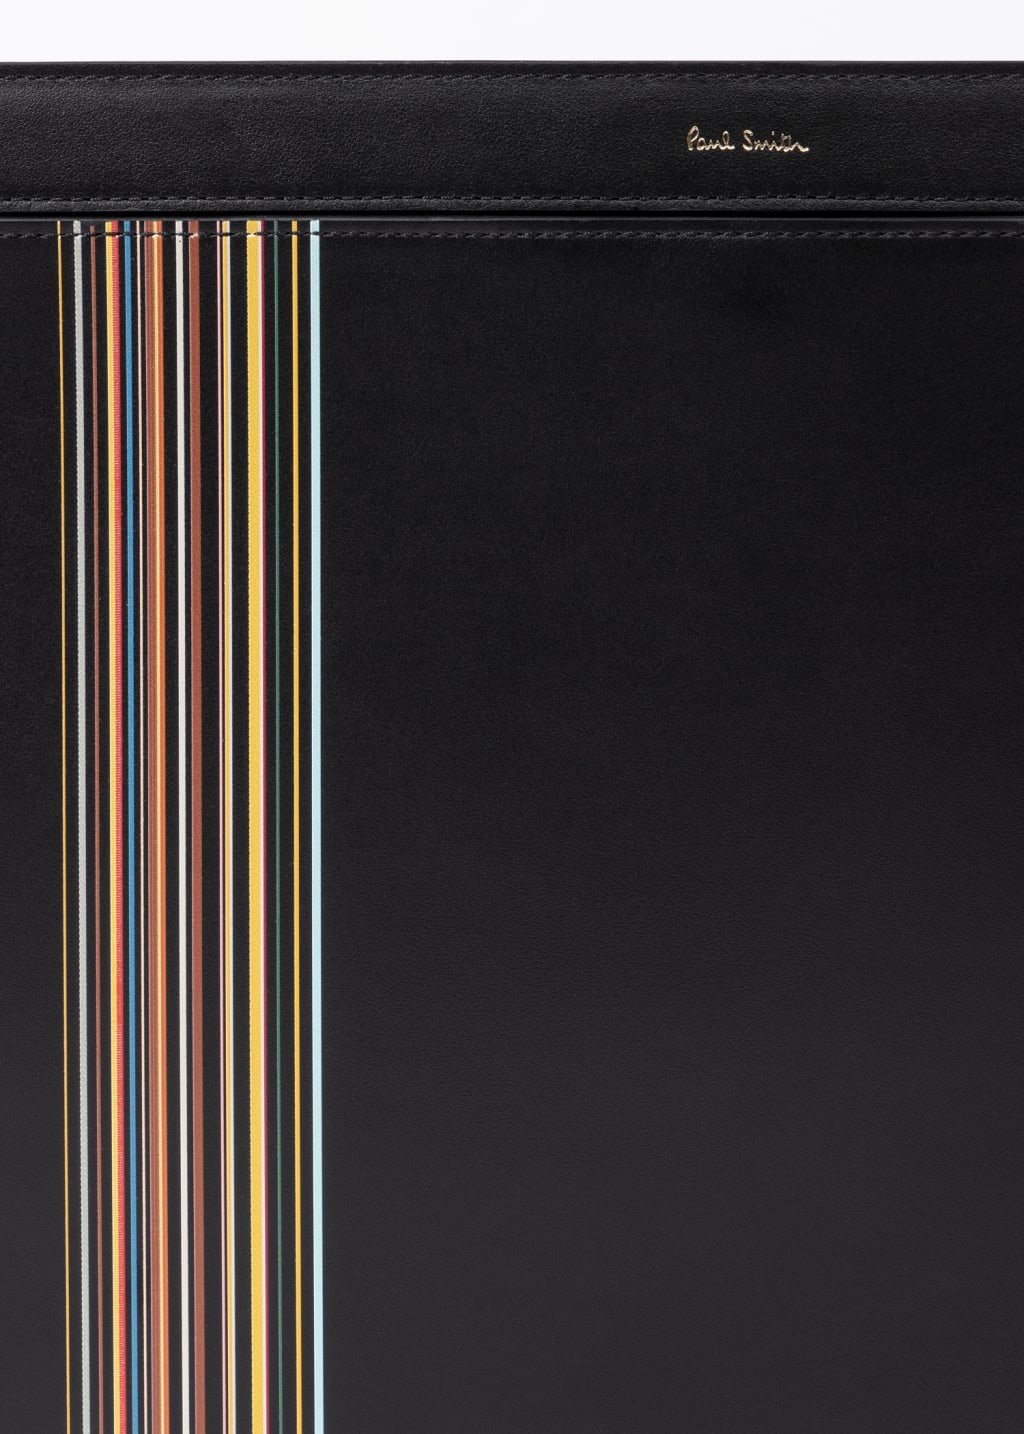 Product View - Black Leather 'Signature Stripe Block' Document Case by Paul Smith